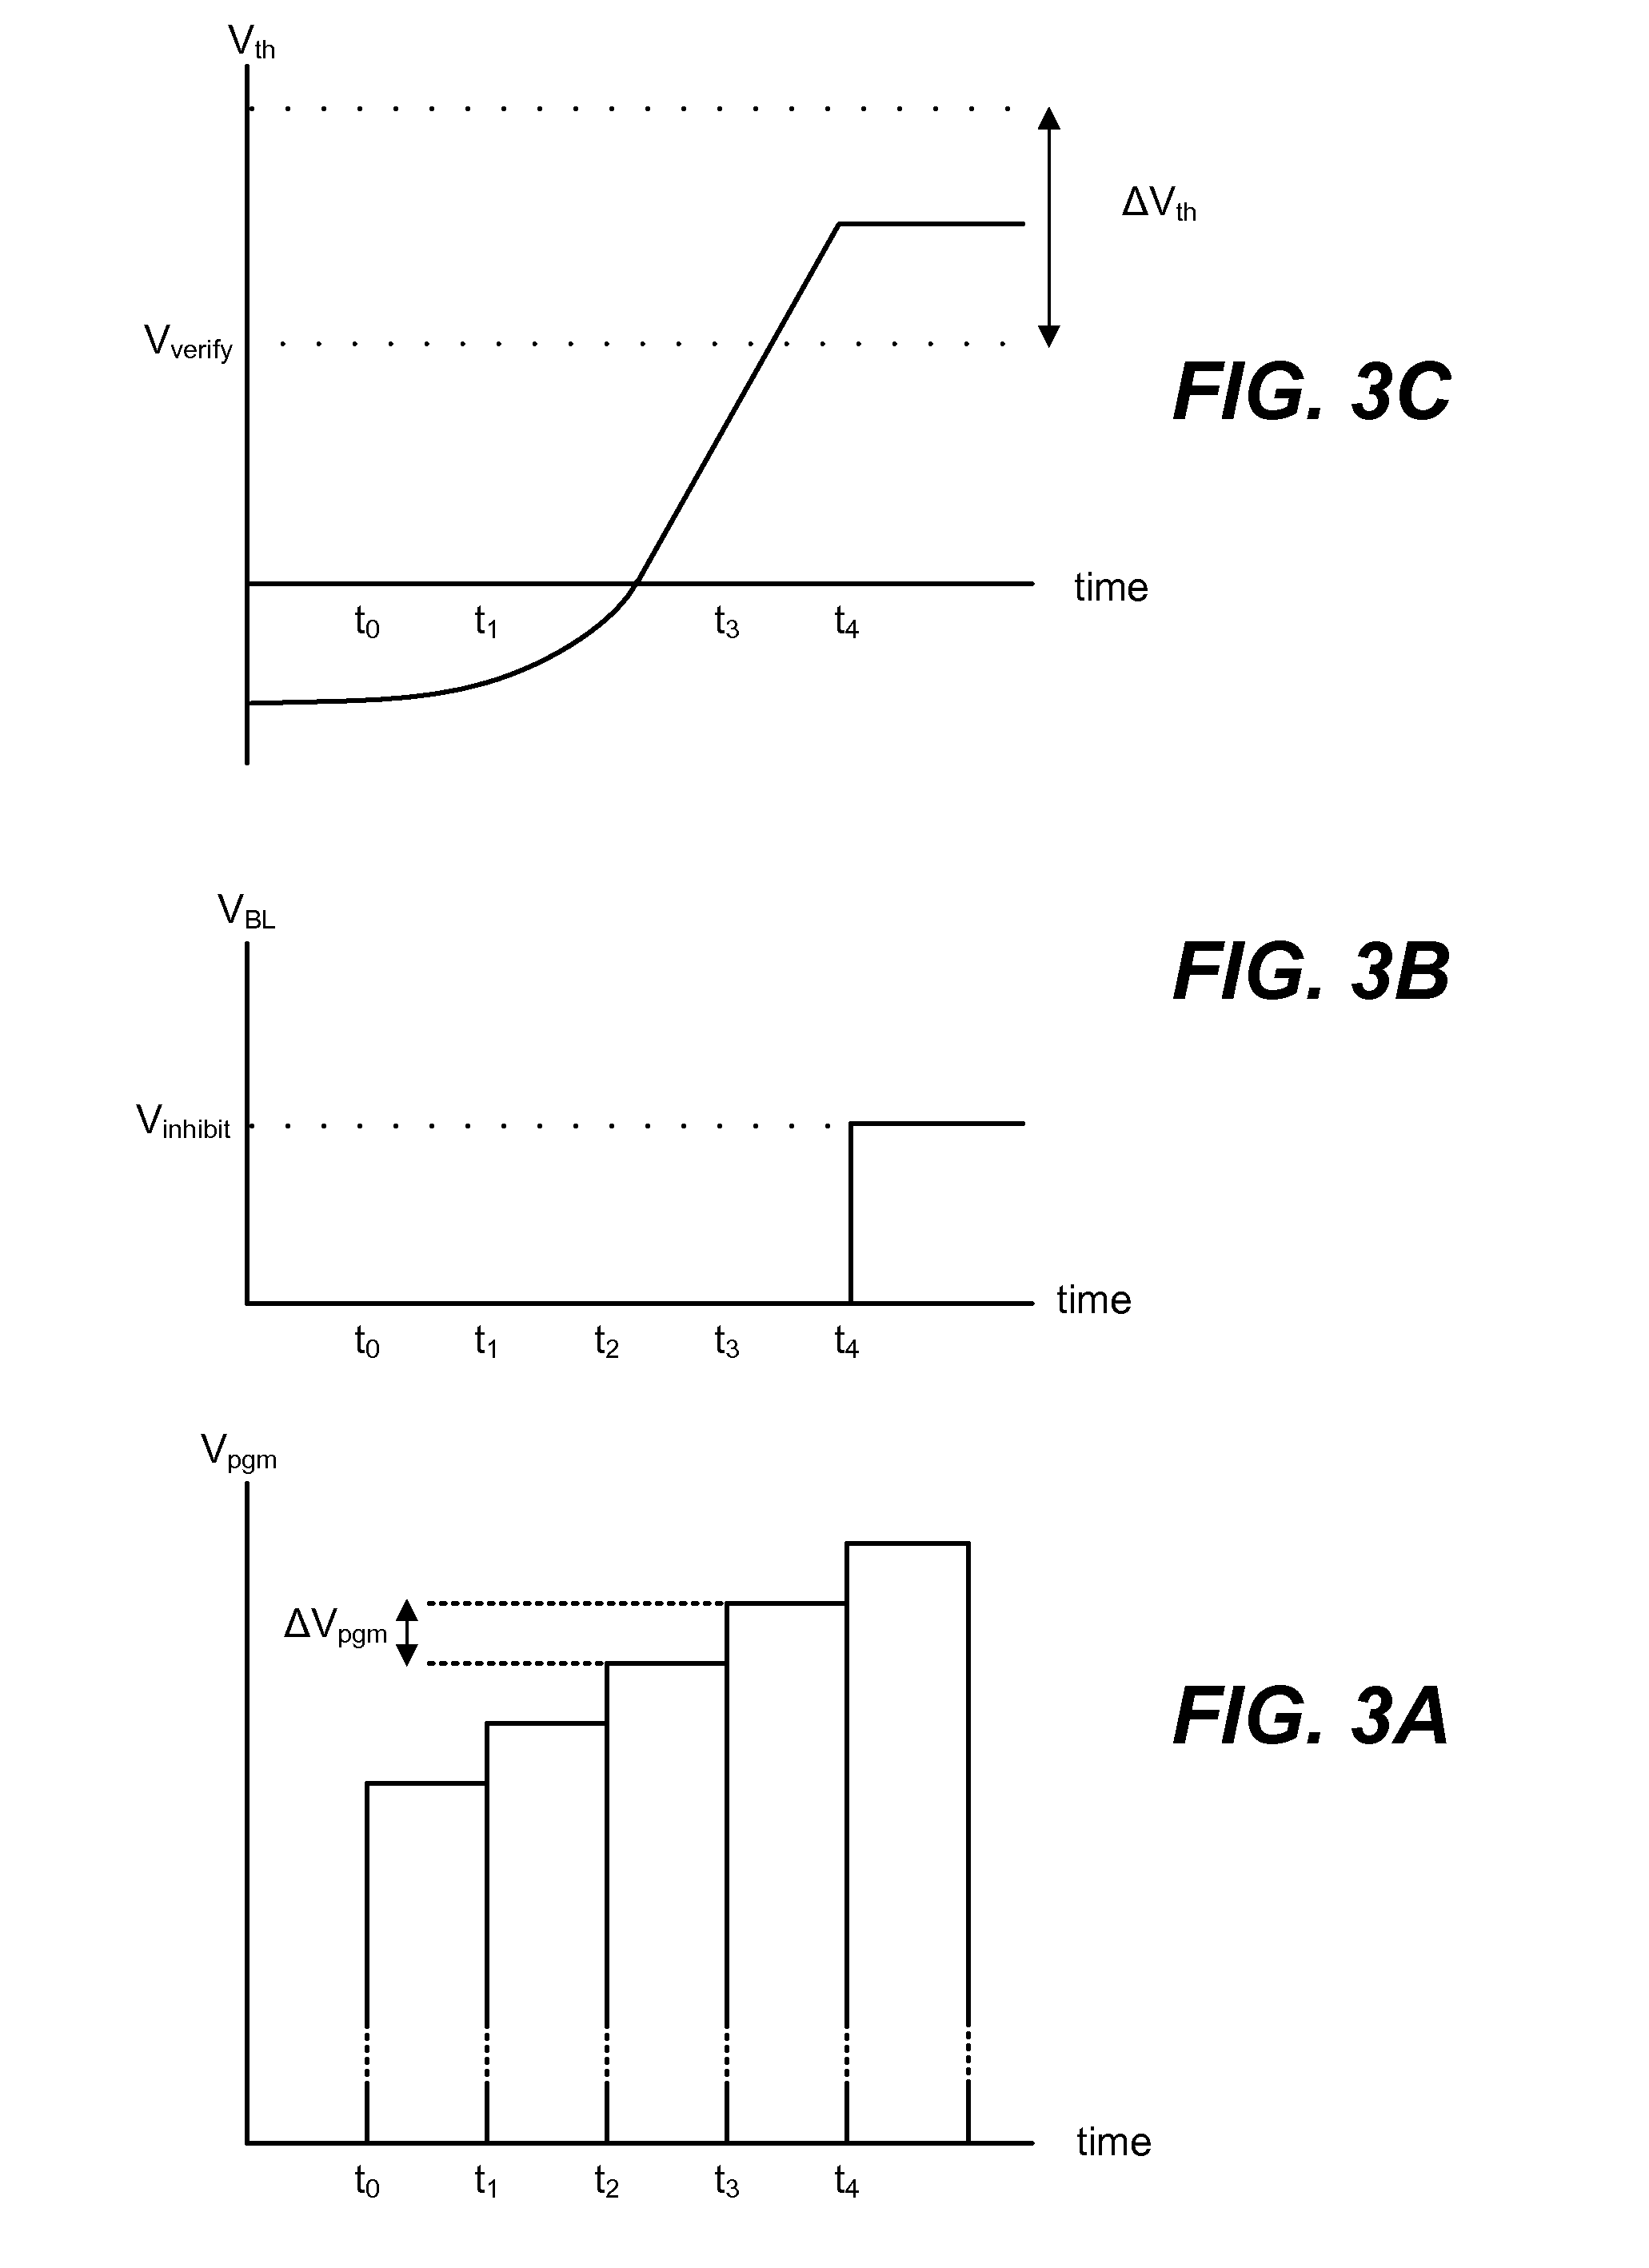 Systems for Coarse/Fine Program Verification in Non-Volatile Memory Using Different Reference Levels for Improved Sensing